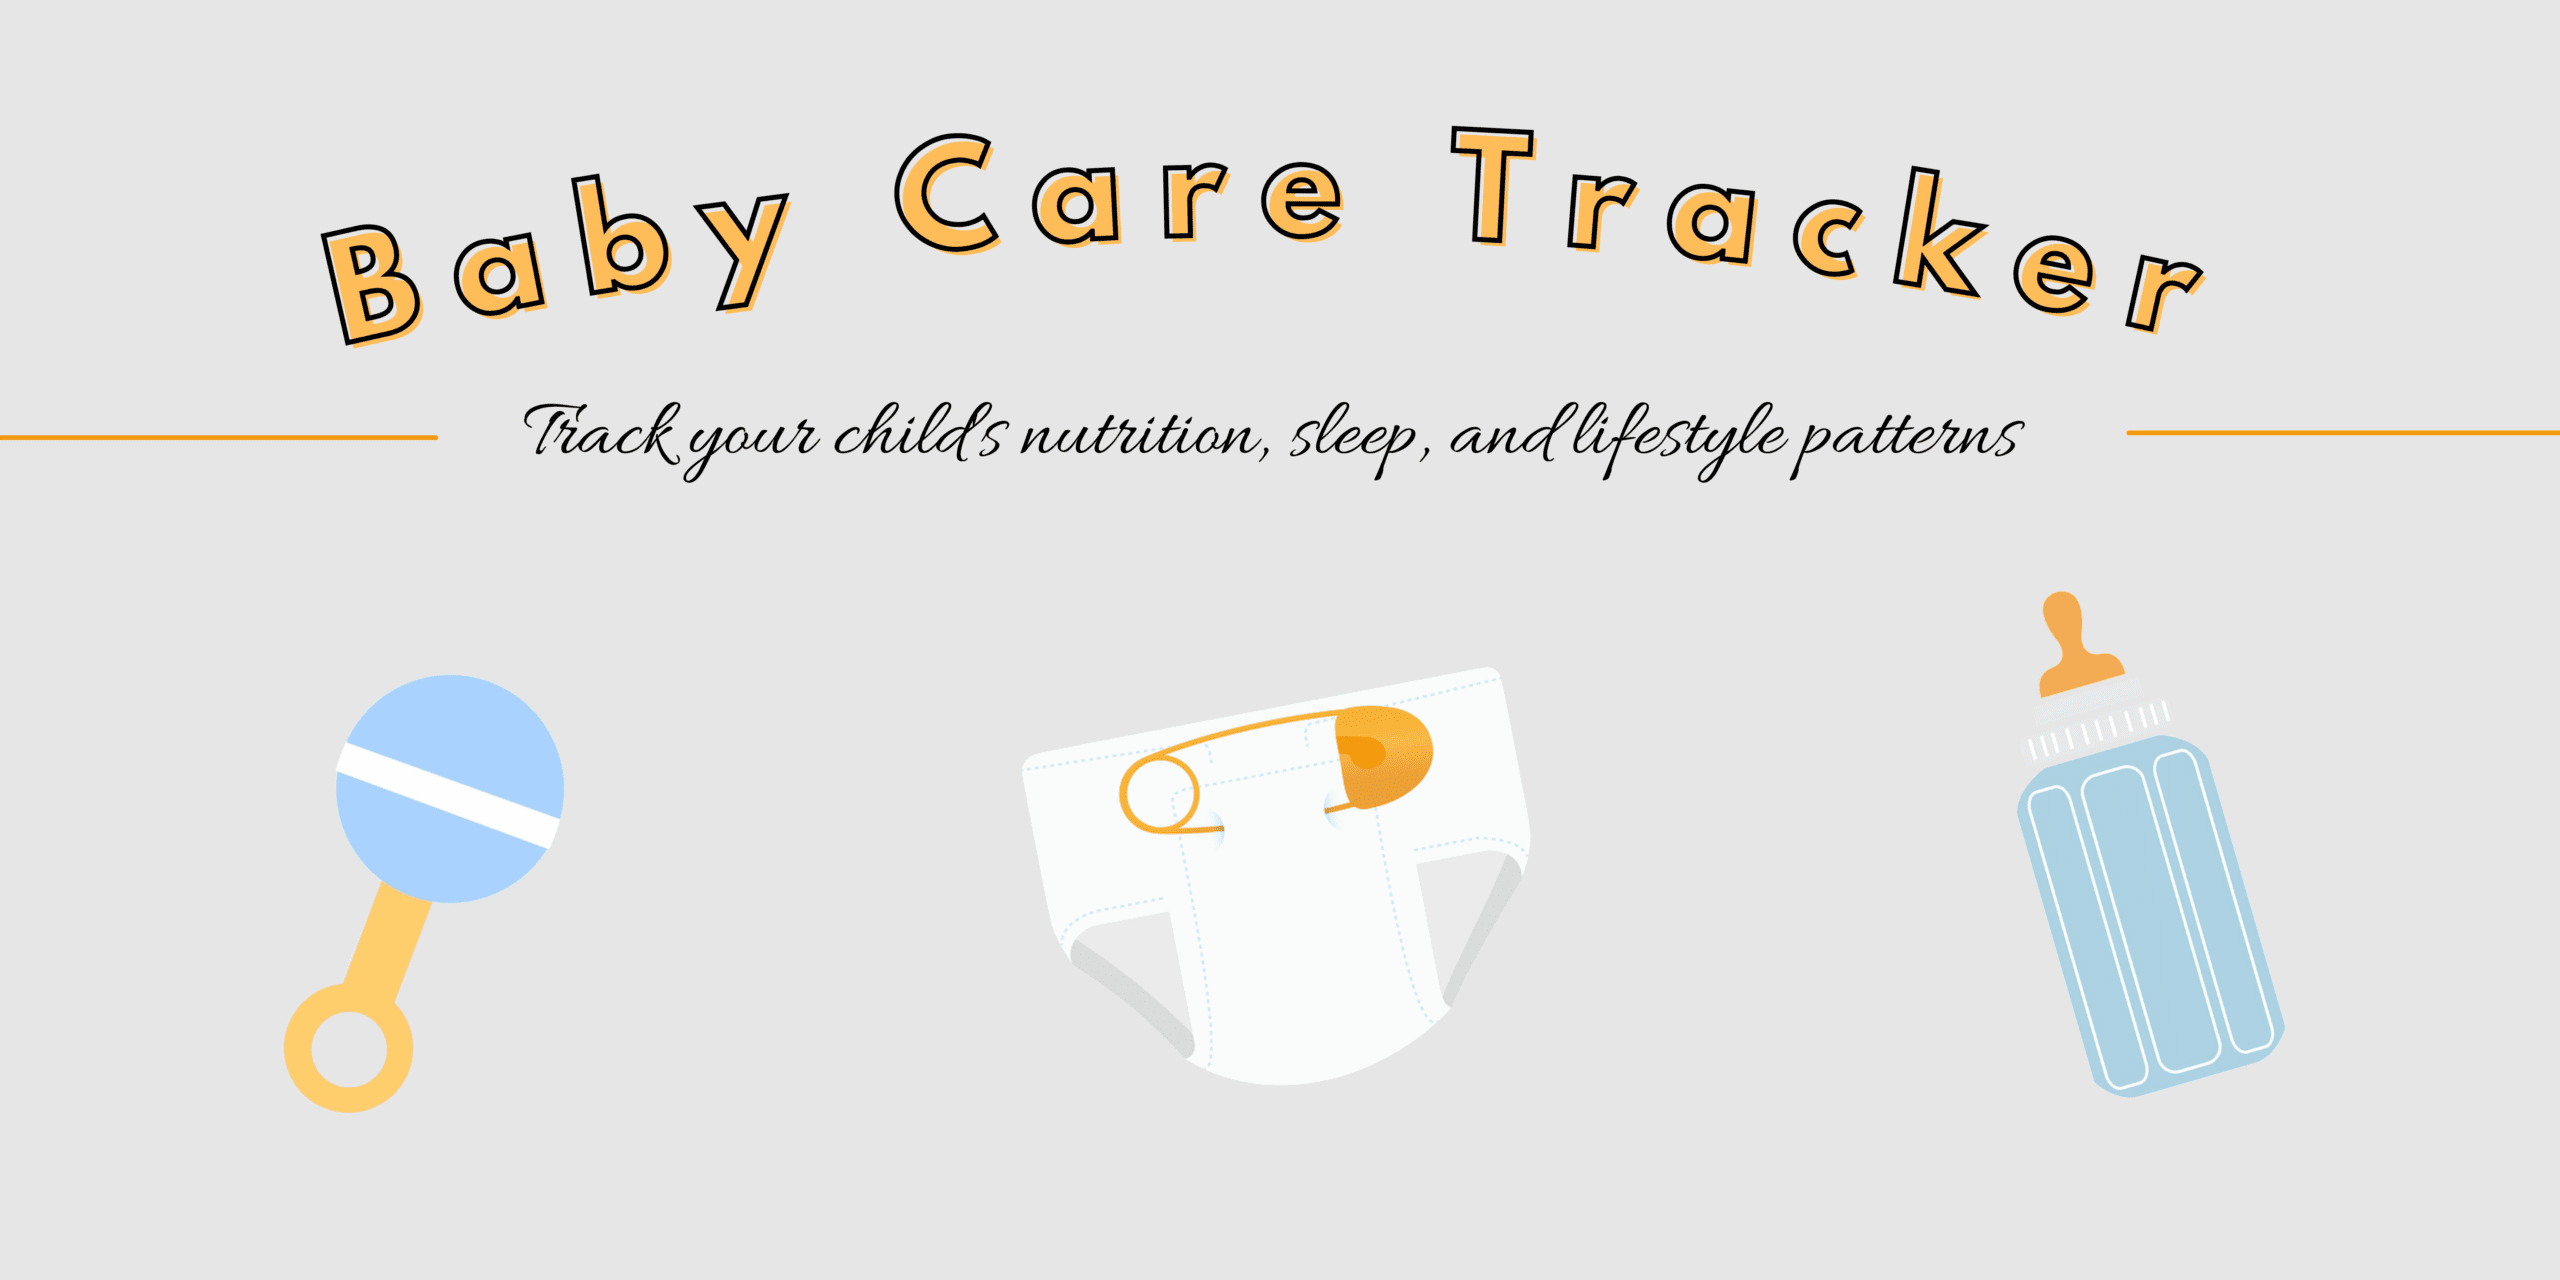 Baby Care Tracker